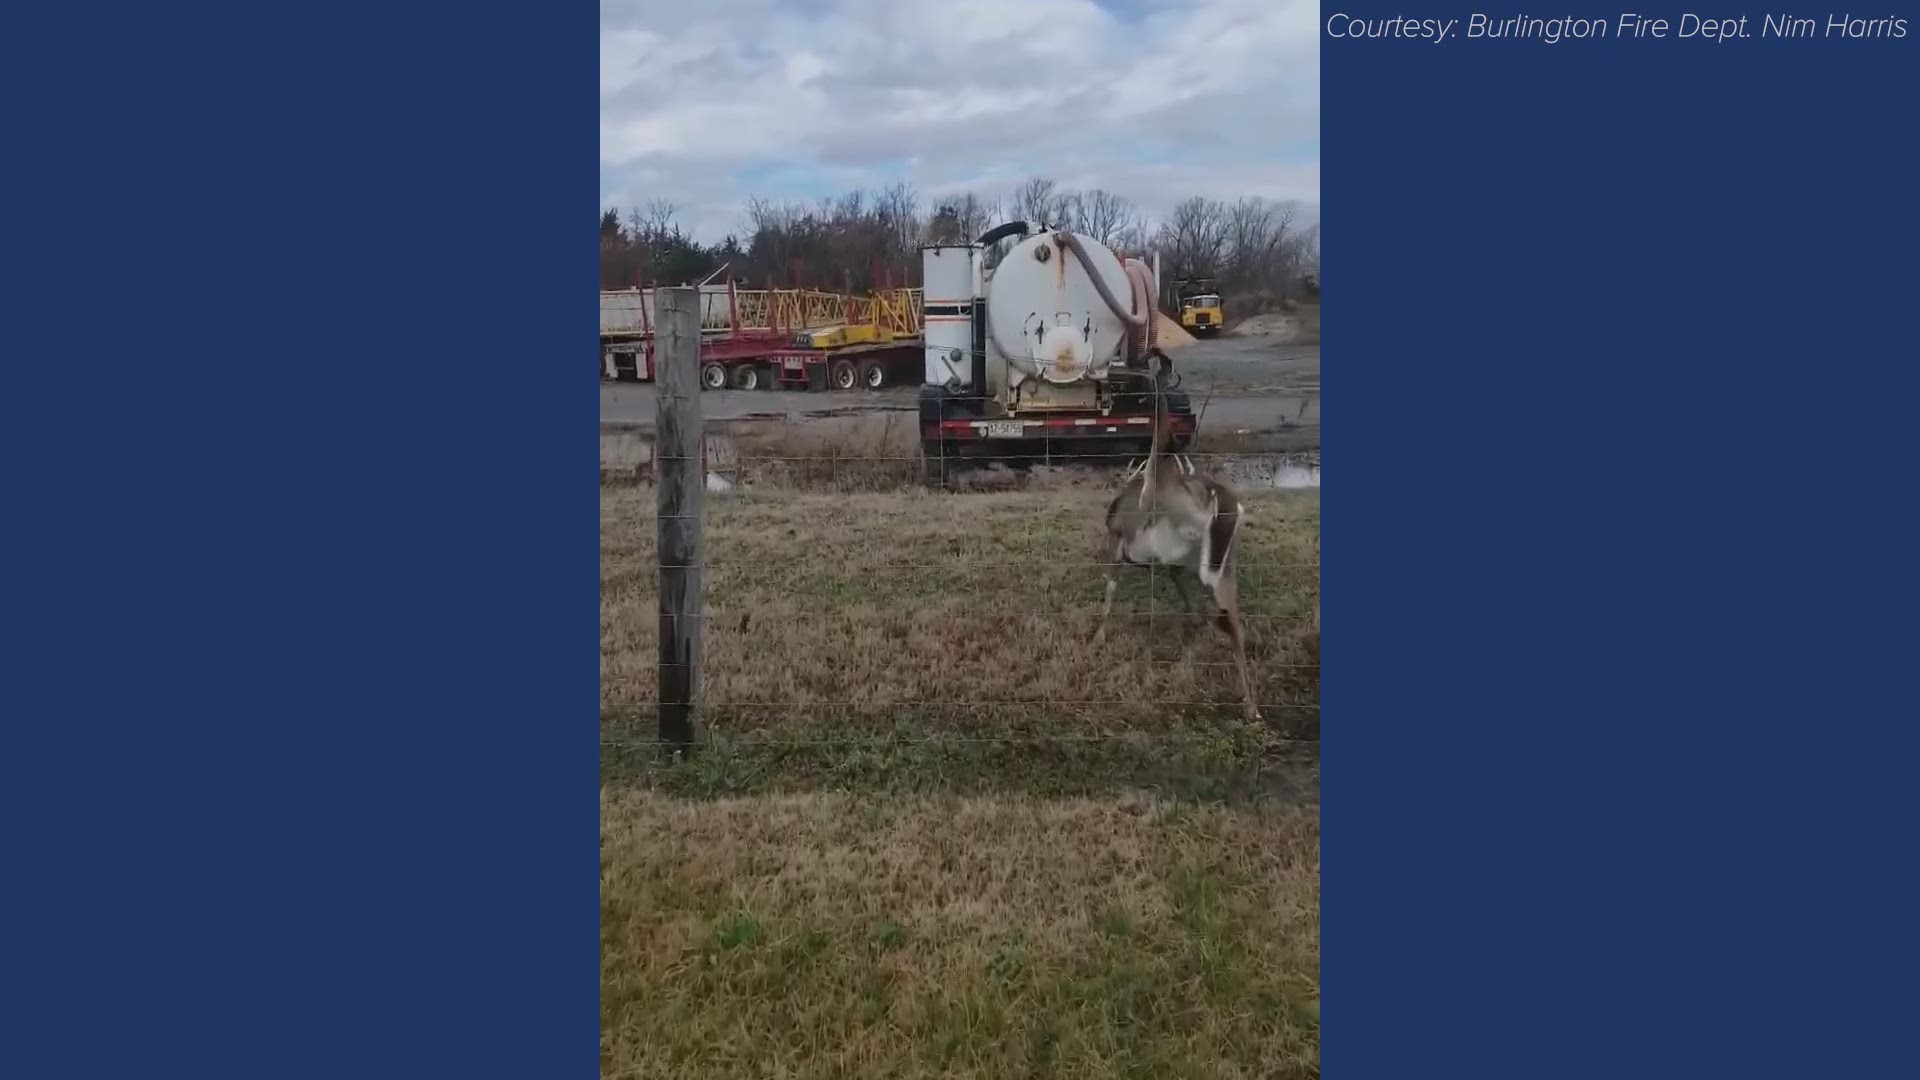 According to Burlington Fire, the deer was found stuck at the intersection of Huffman Mill Rd/University Dr. in Burlington on Sunday.